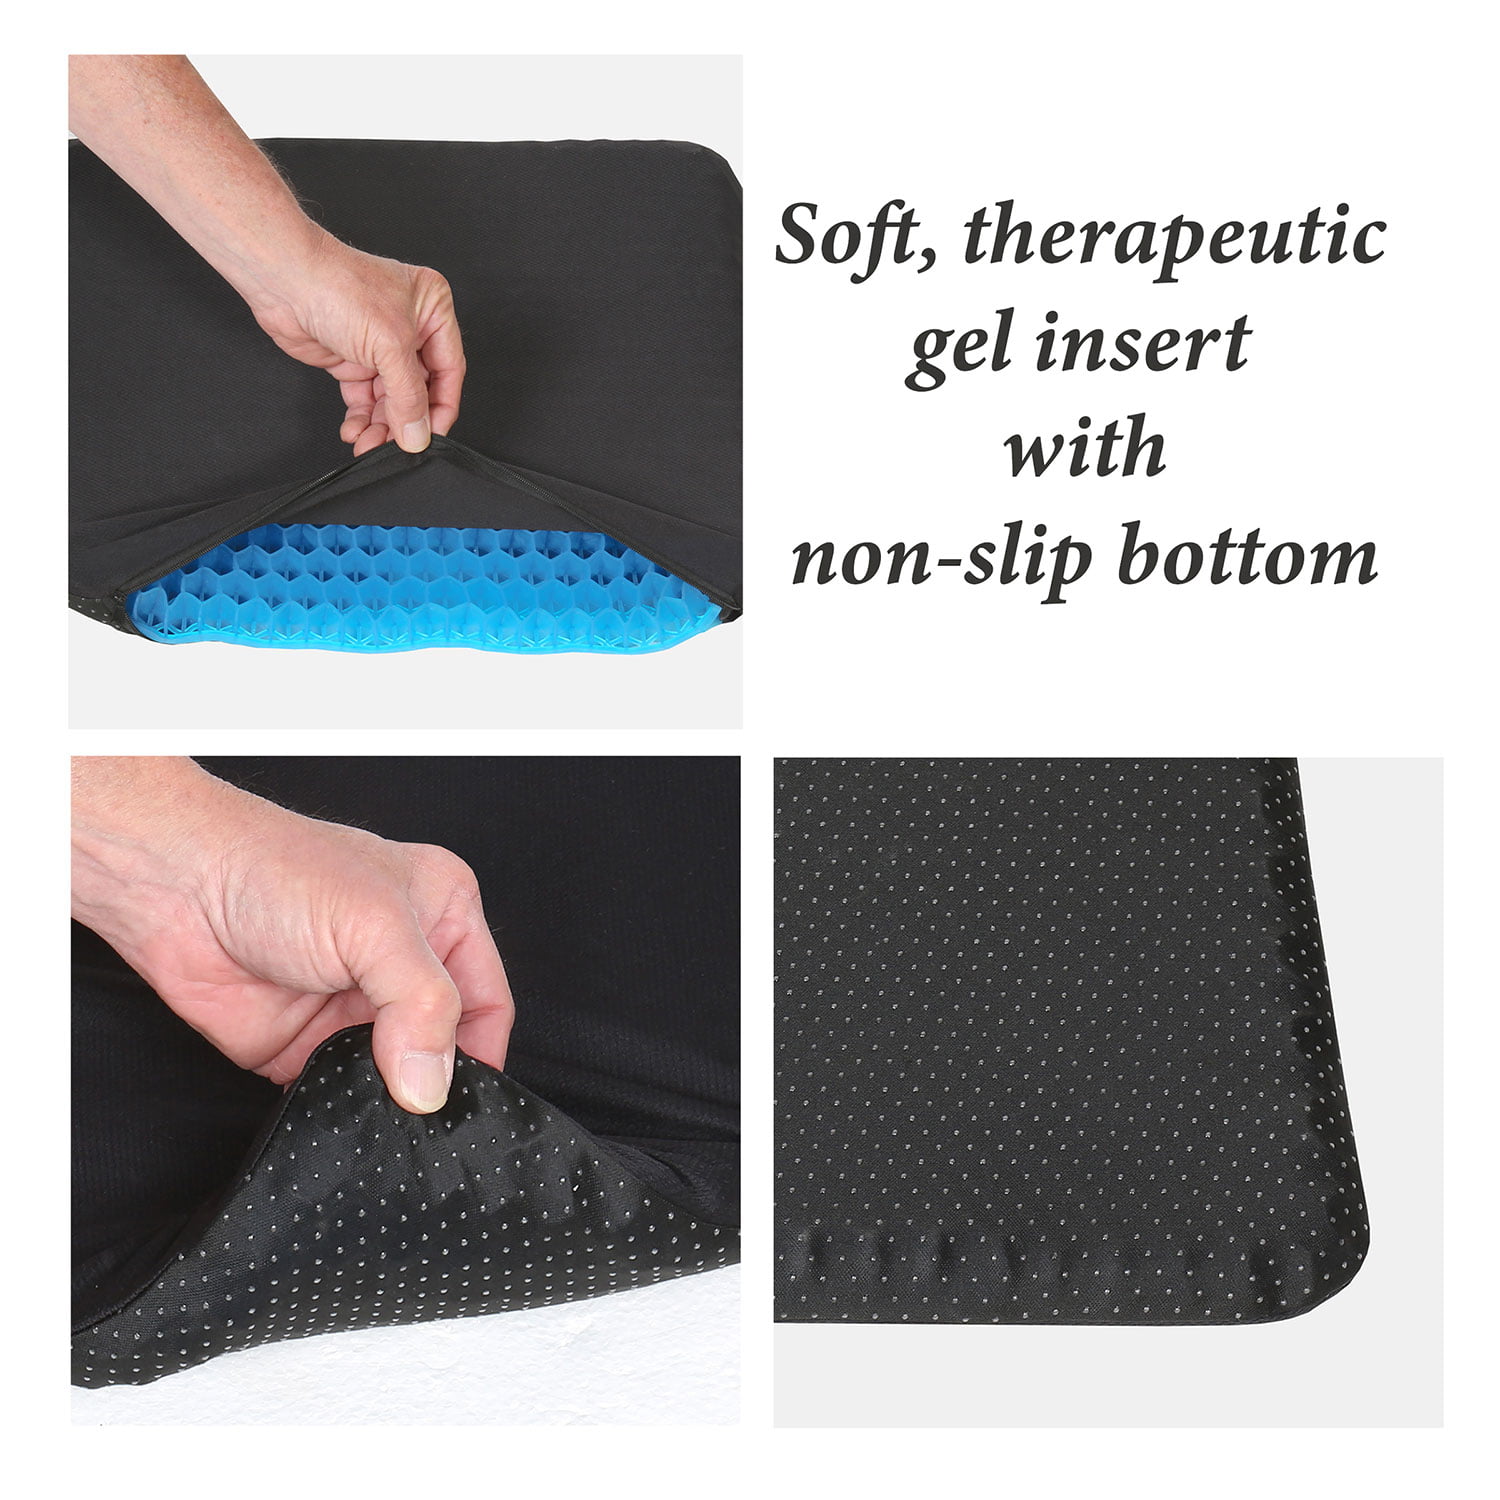 Support Plus Tufted Booster Cushion